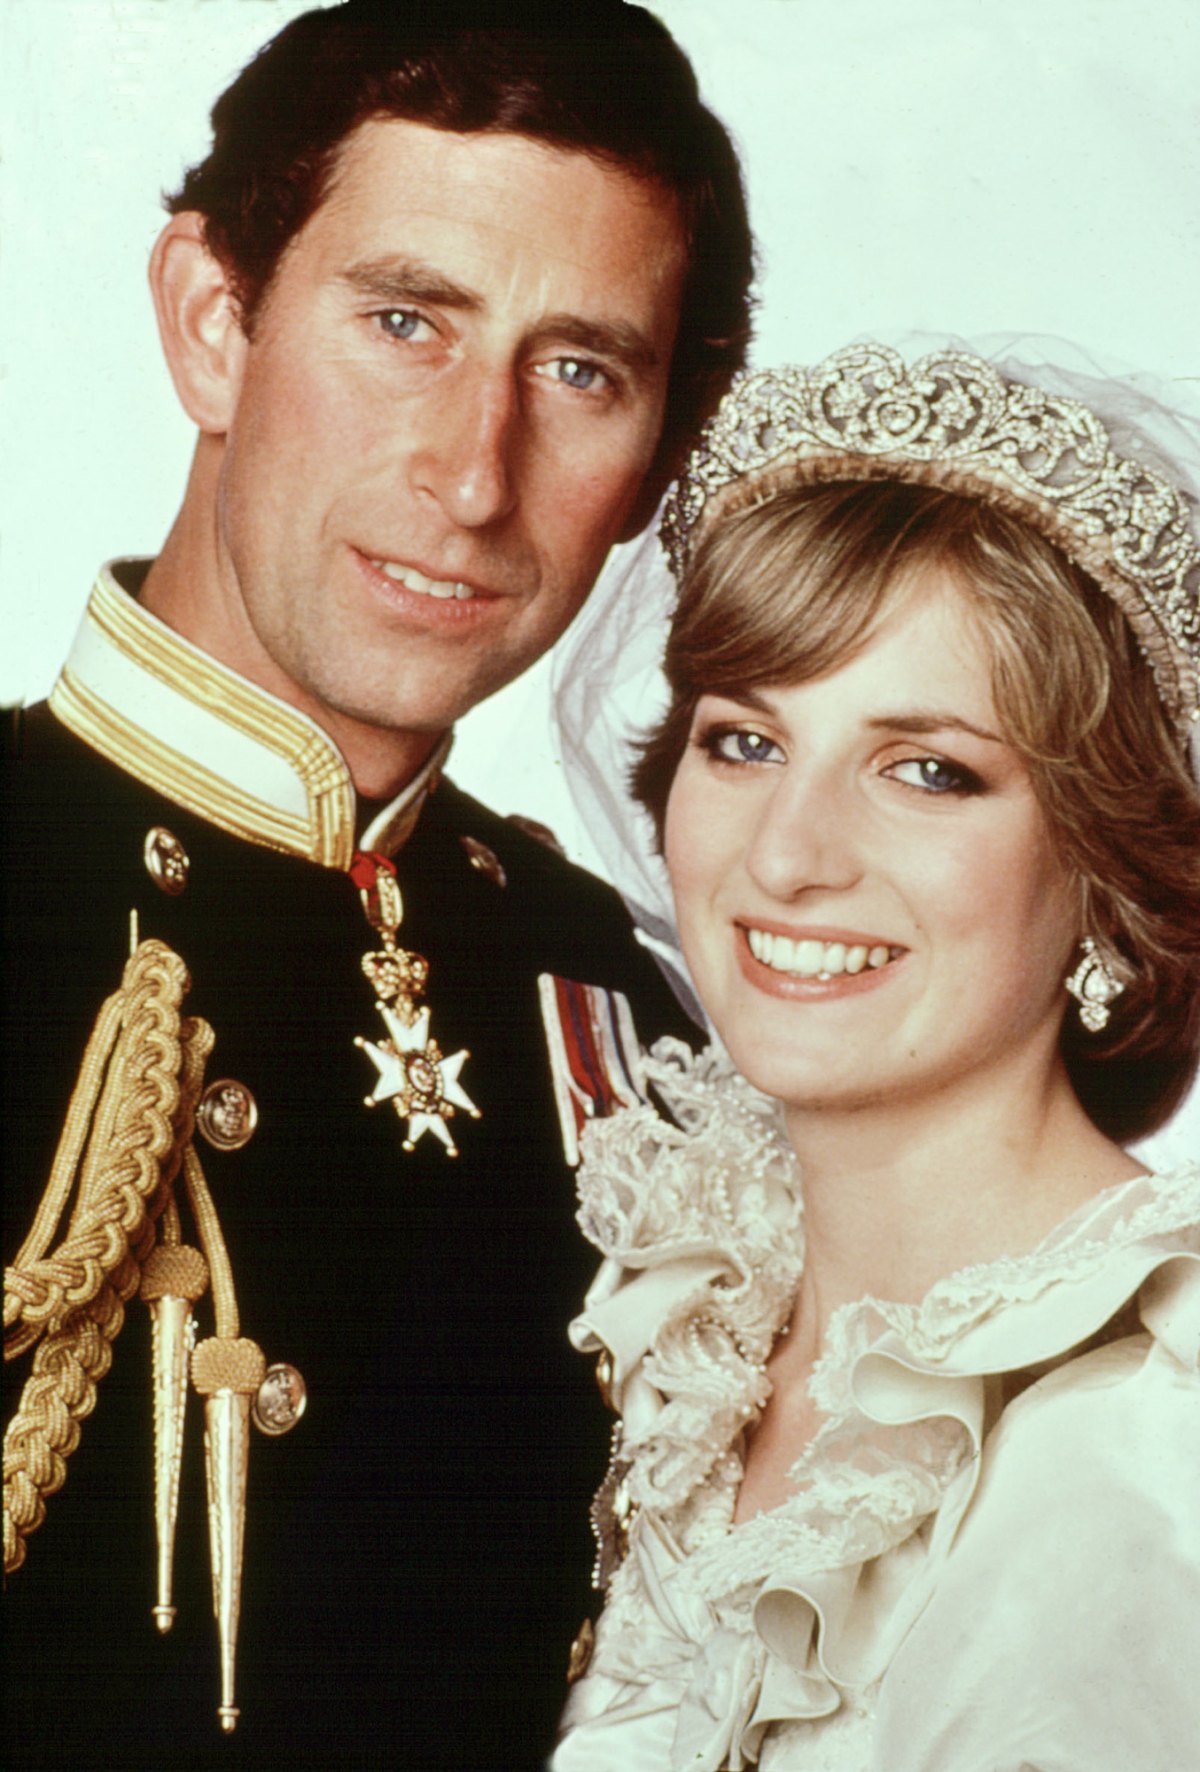 Prince Charles Through the Years: His Life in Photos